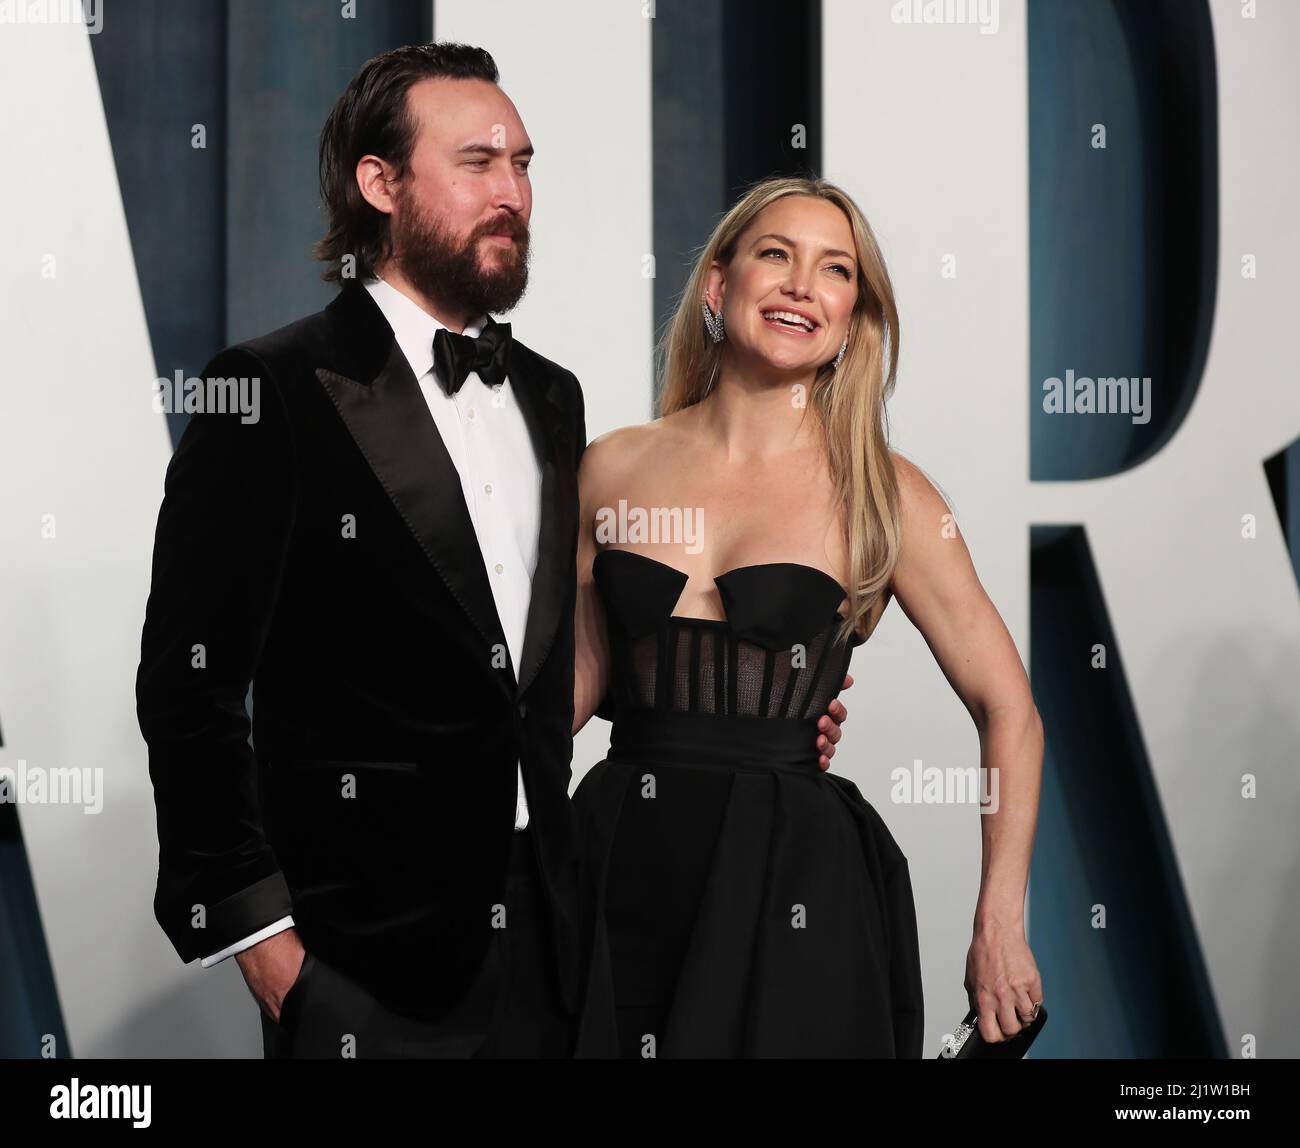 Kate Hudson and Danny Fujikawa arrive at the Vanity Fair Oscar party during the 94th Academy Awards in Beverly Hills, California, U.S., March 27, 2022. REUTERS/Danny Moloshok Stock Photo